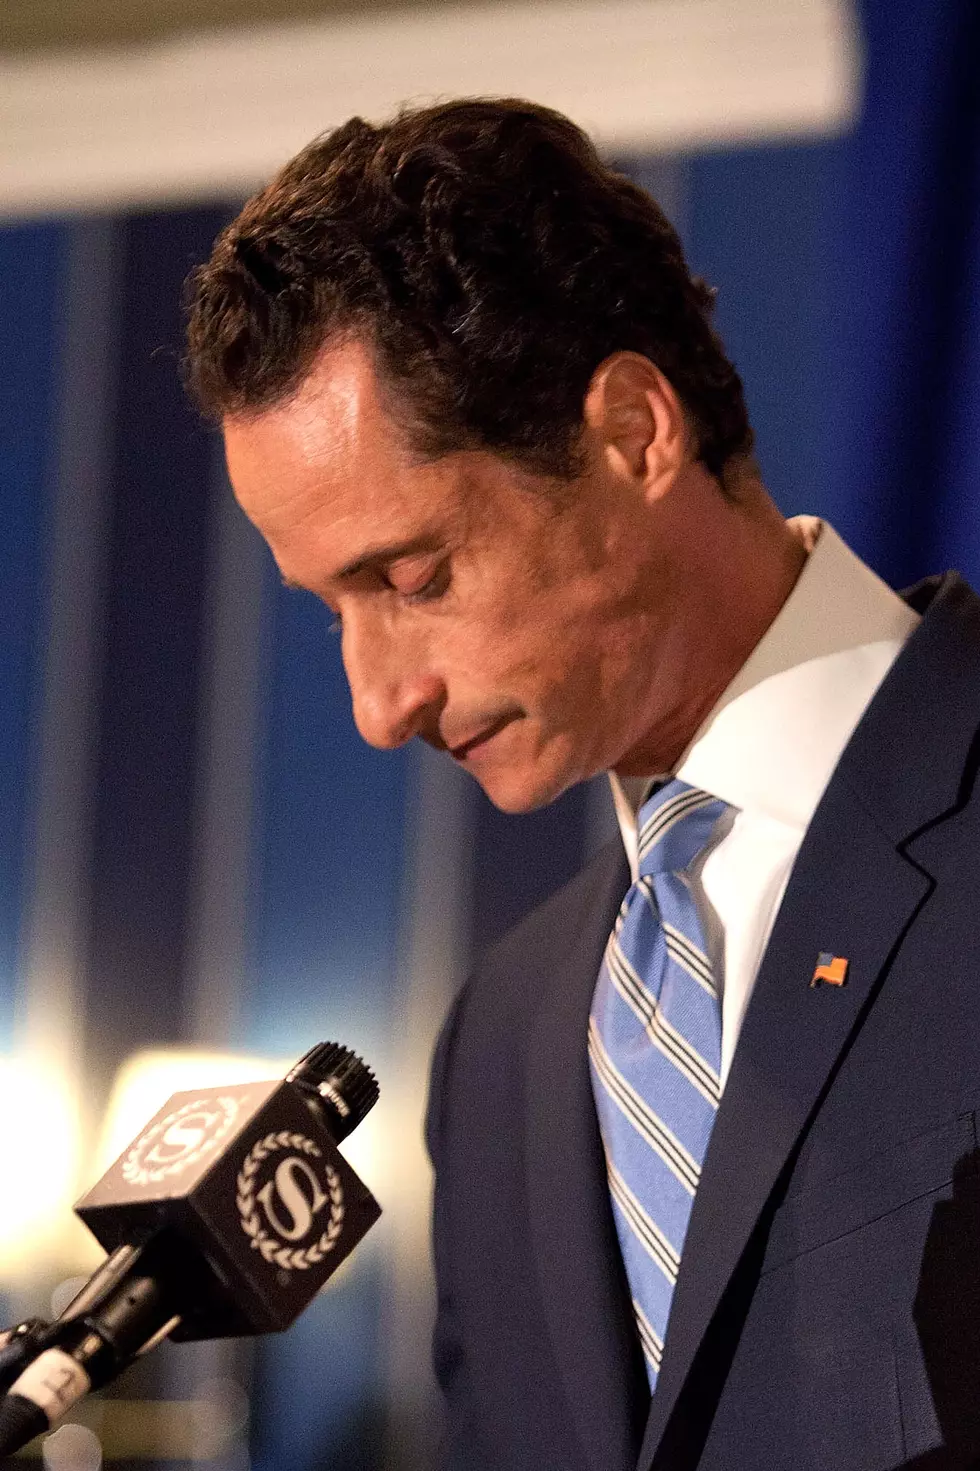 Anthony Weiner Admits Posting Lewd Pictures on Twitter [POLL]